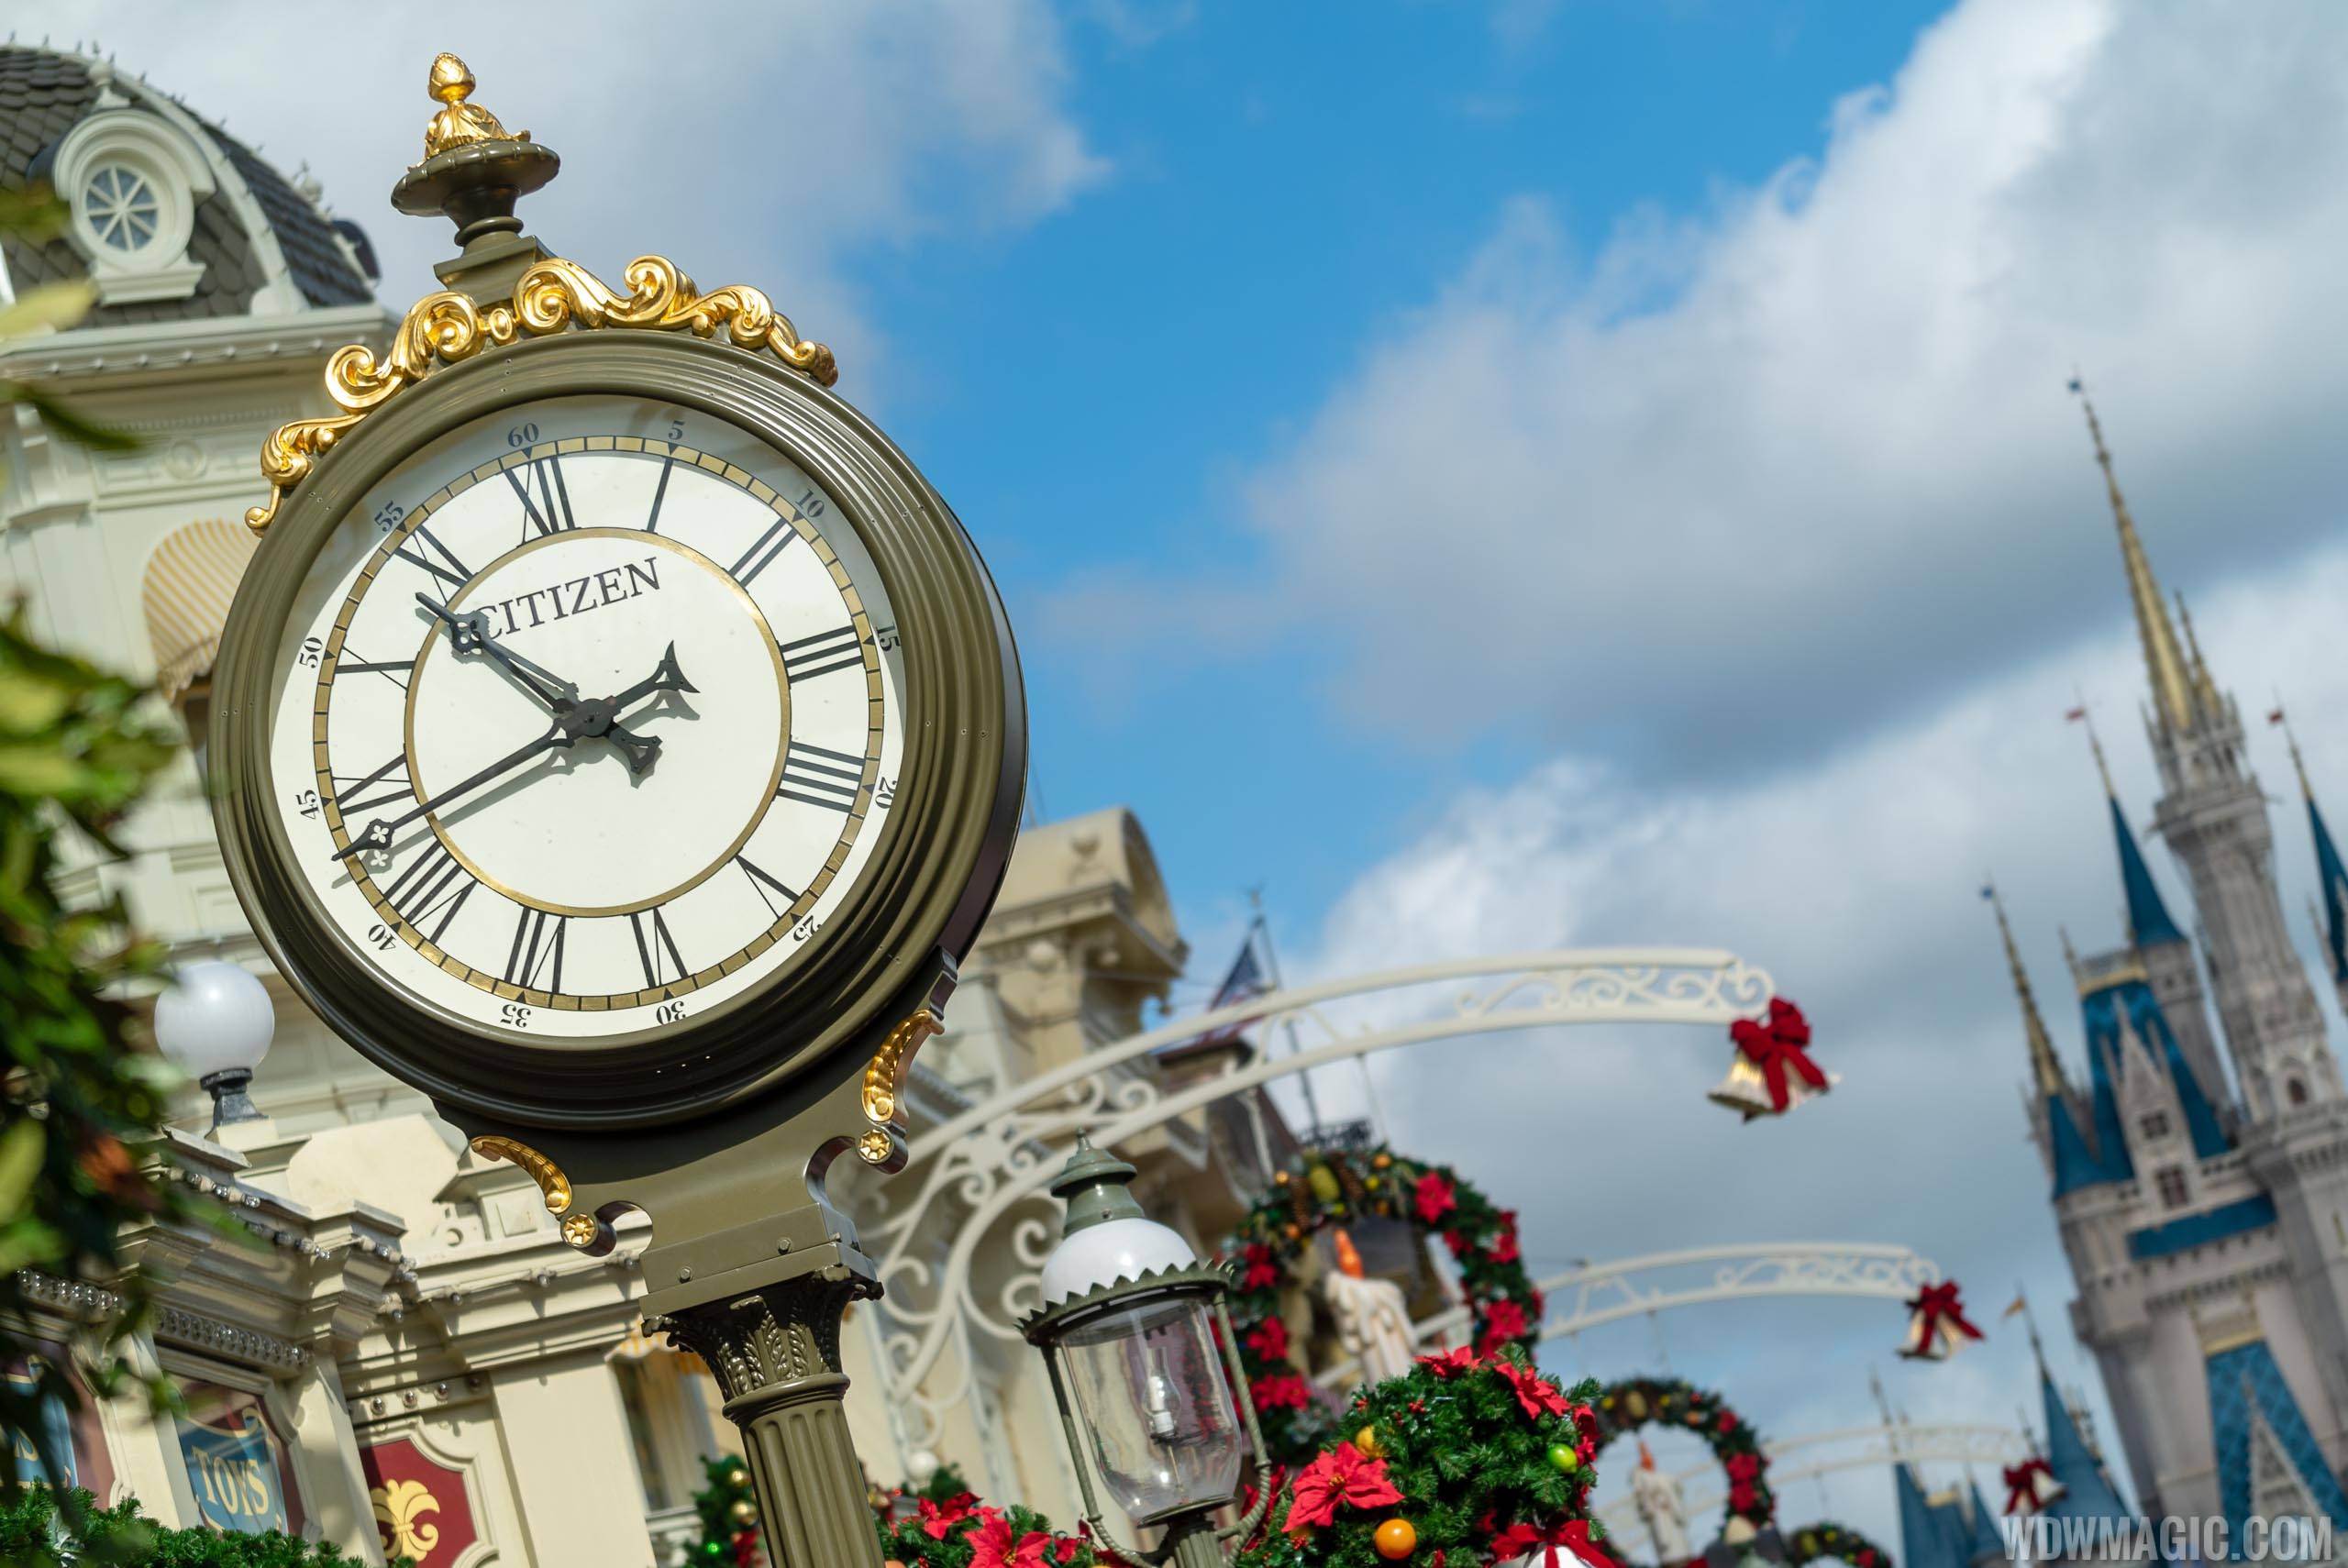 Newly branded Citizen in-park clock on Main Street U.S.A.